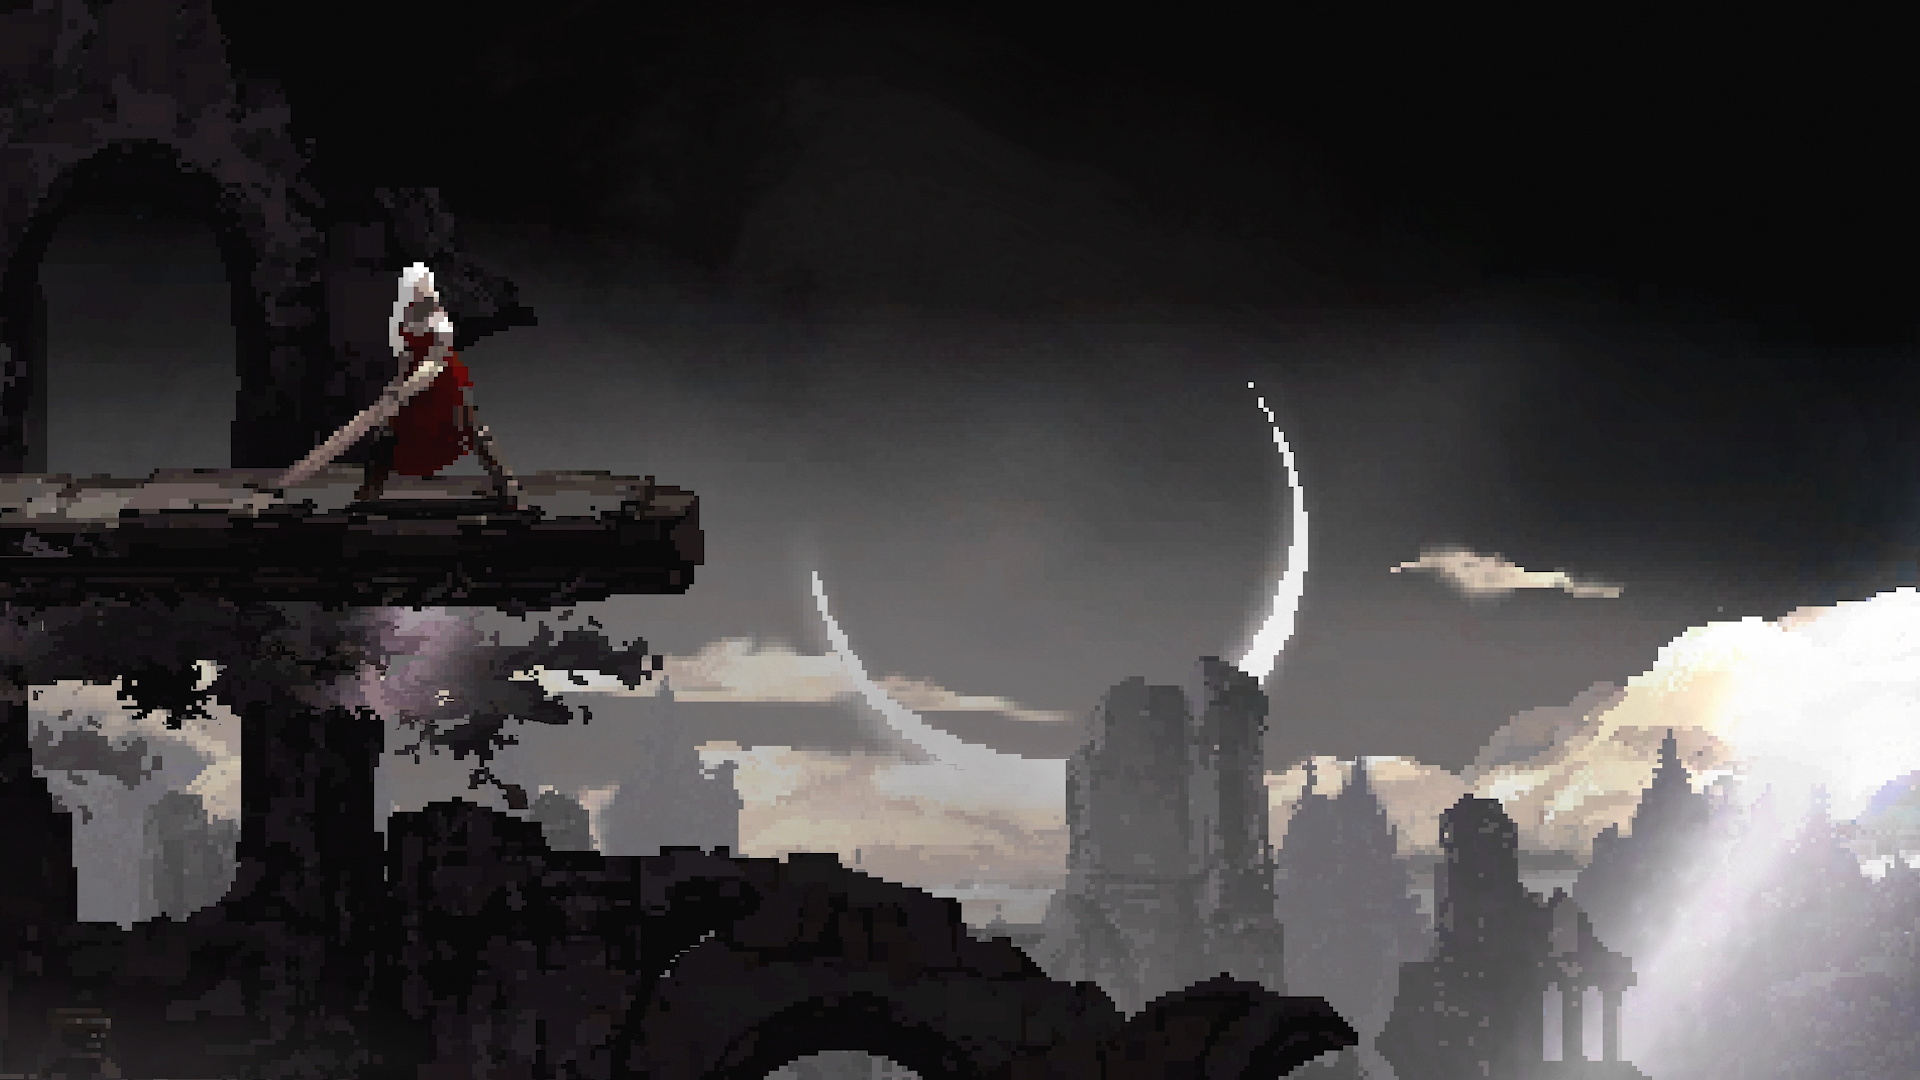 A pixel art shot from Moonscars; a woman in a red dress with white hair stands with a large sword against a backdrop of ruins with a large crescent moon.